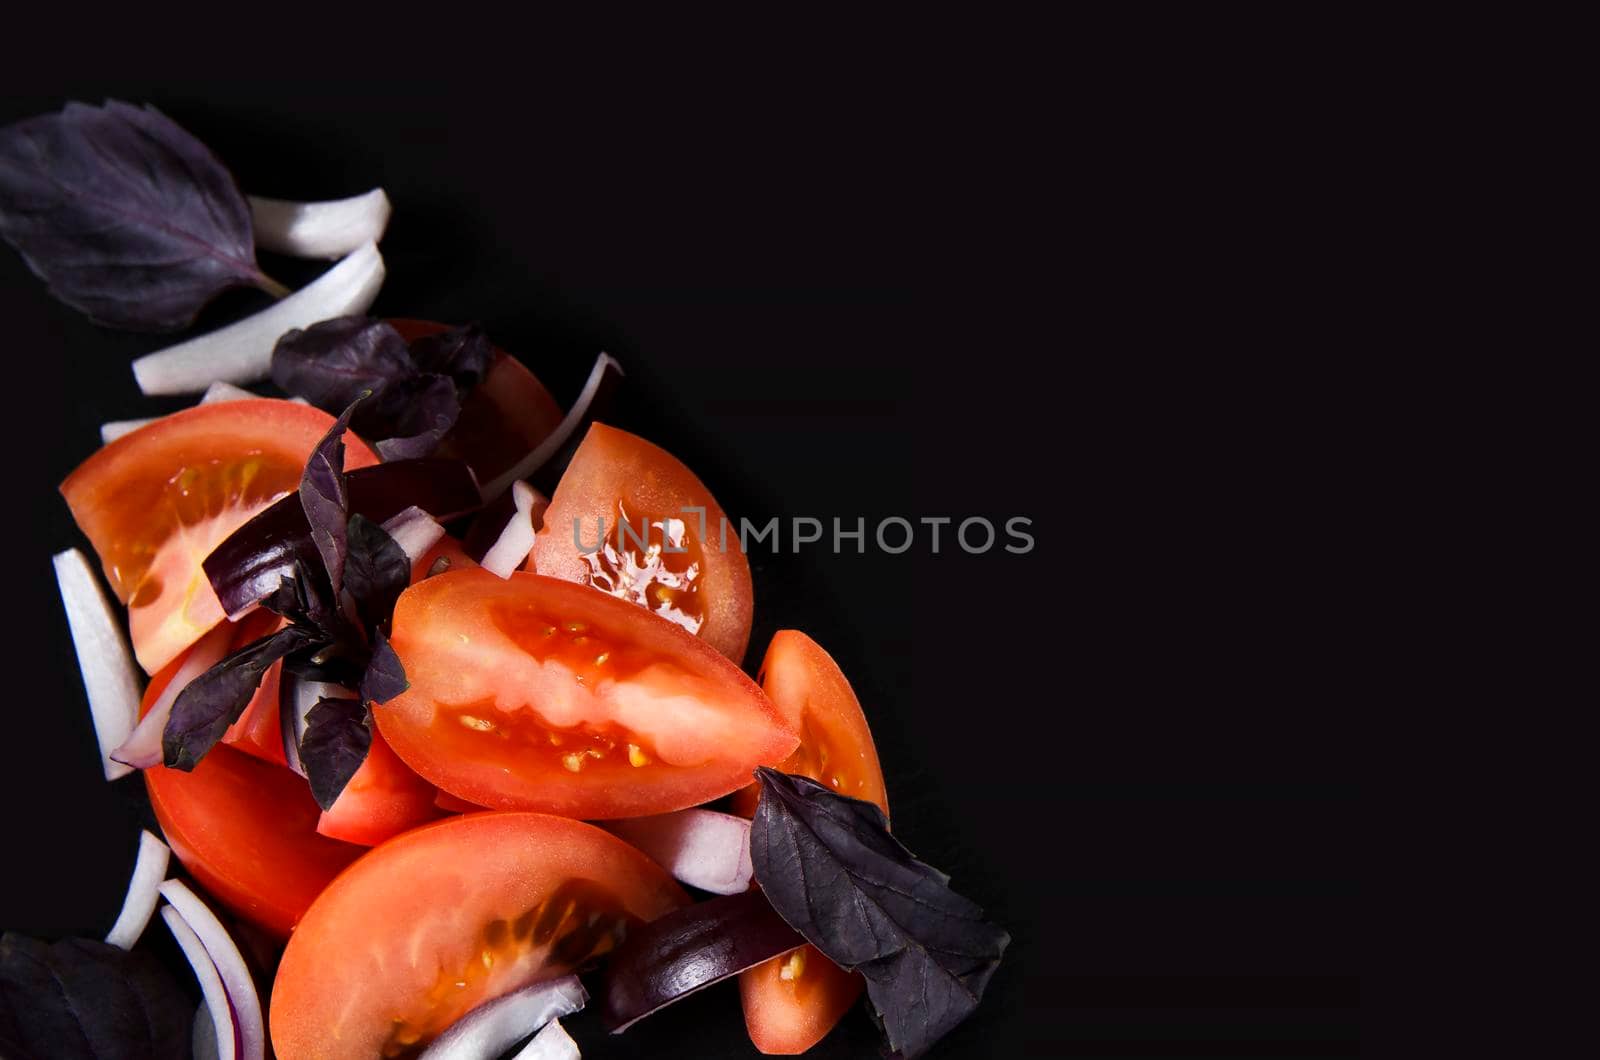 Slices of tomato. Vegetables on Black background with copy space